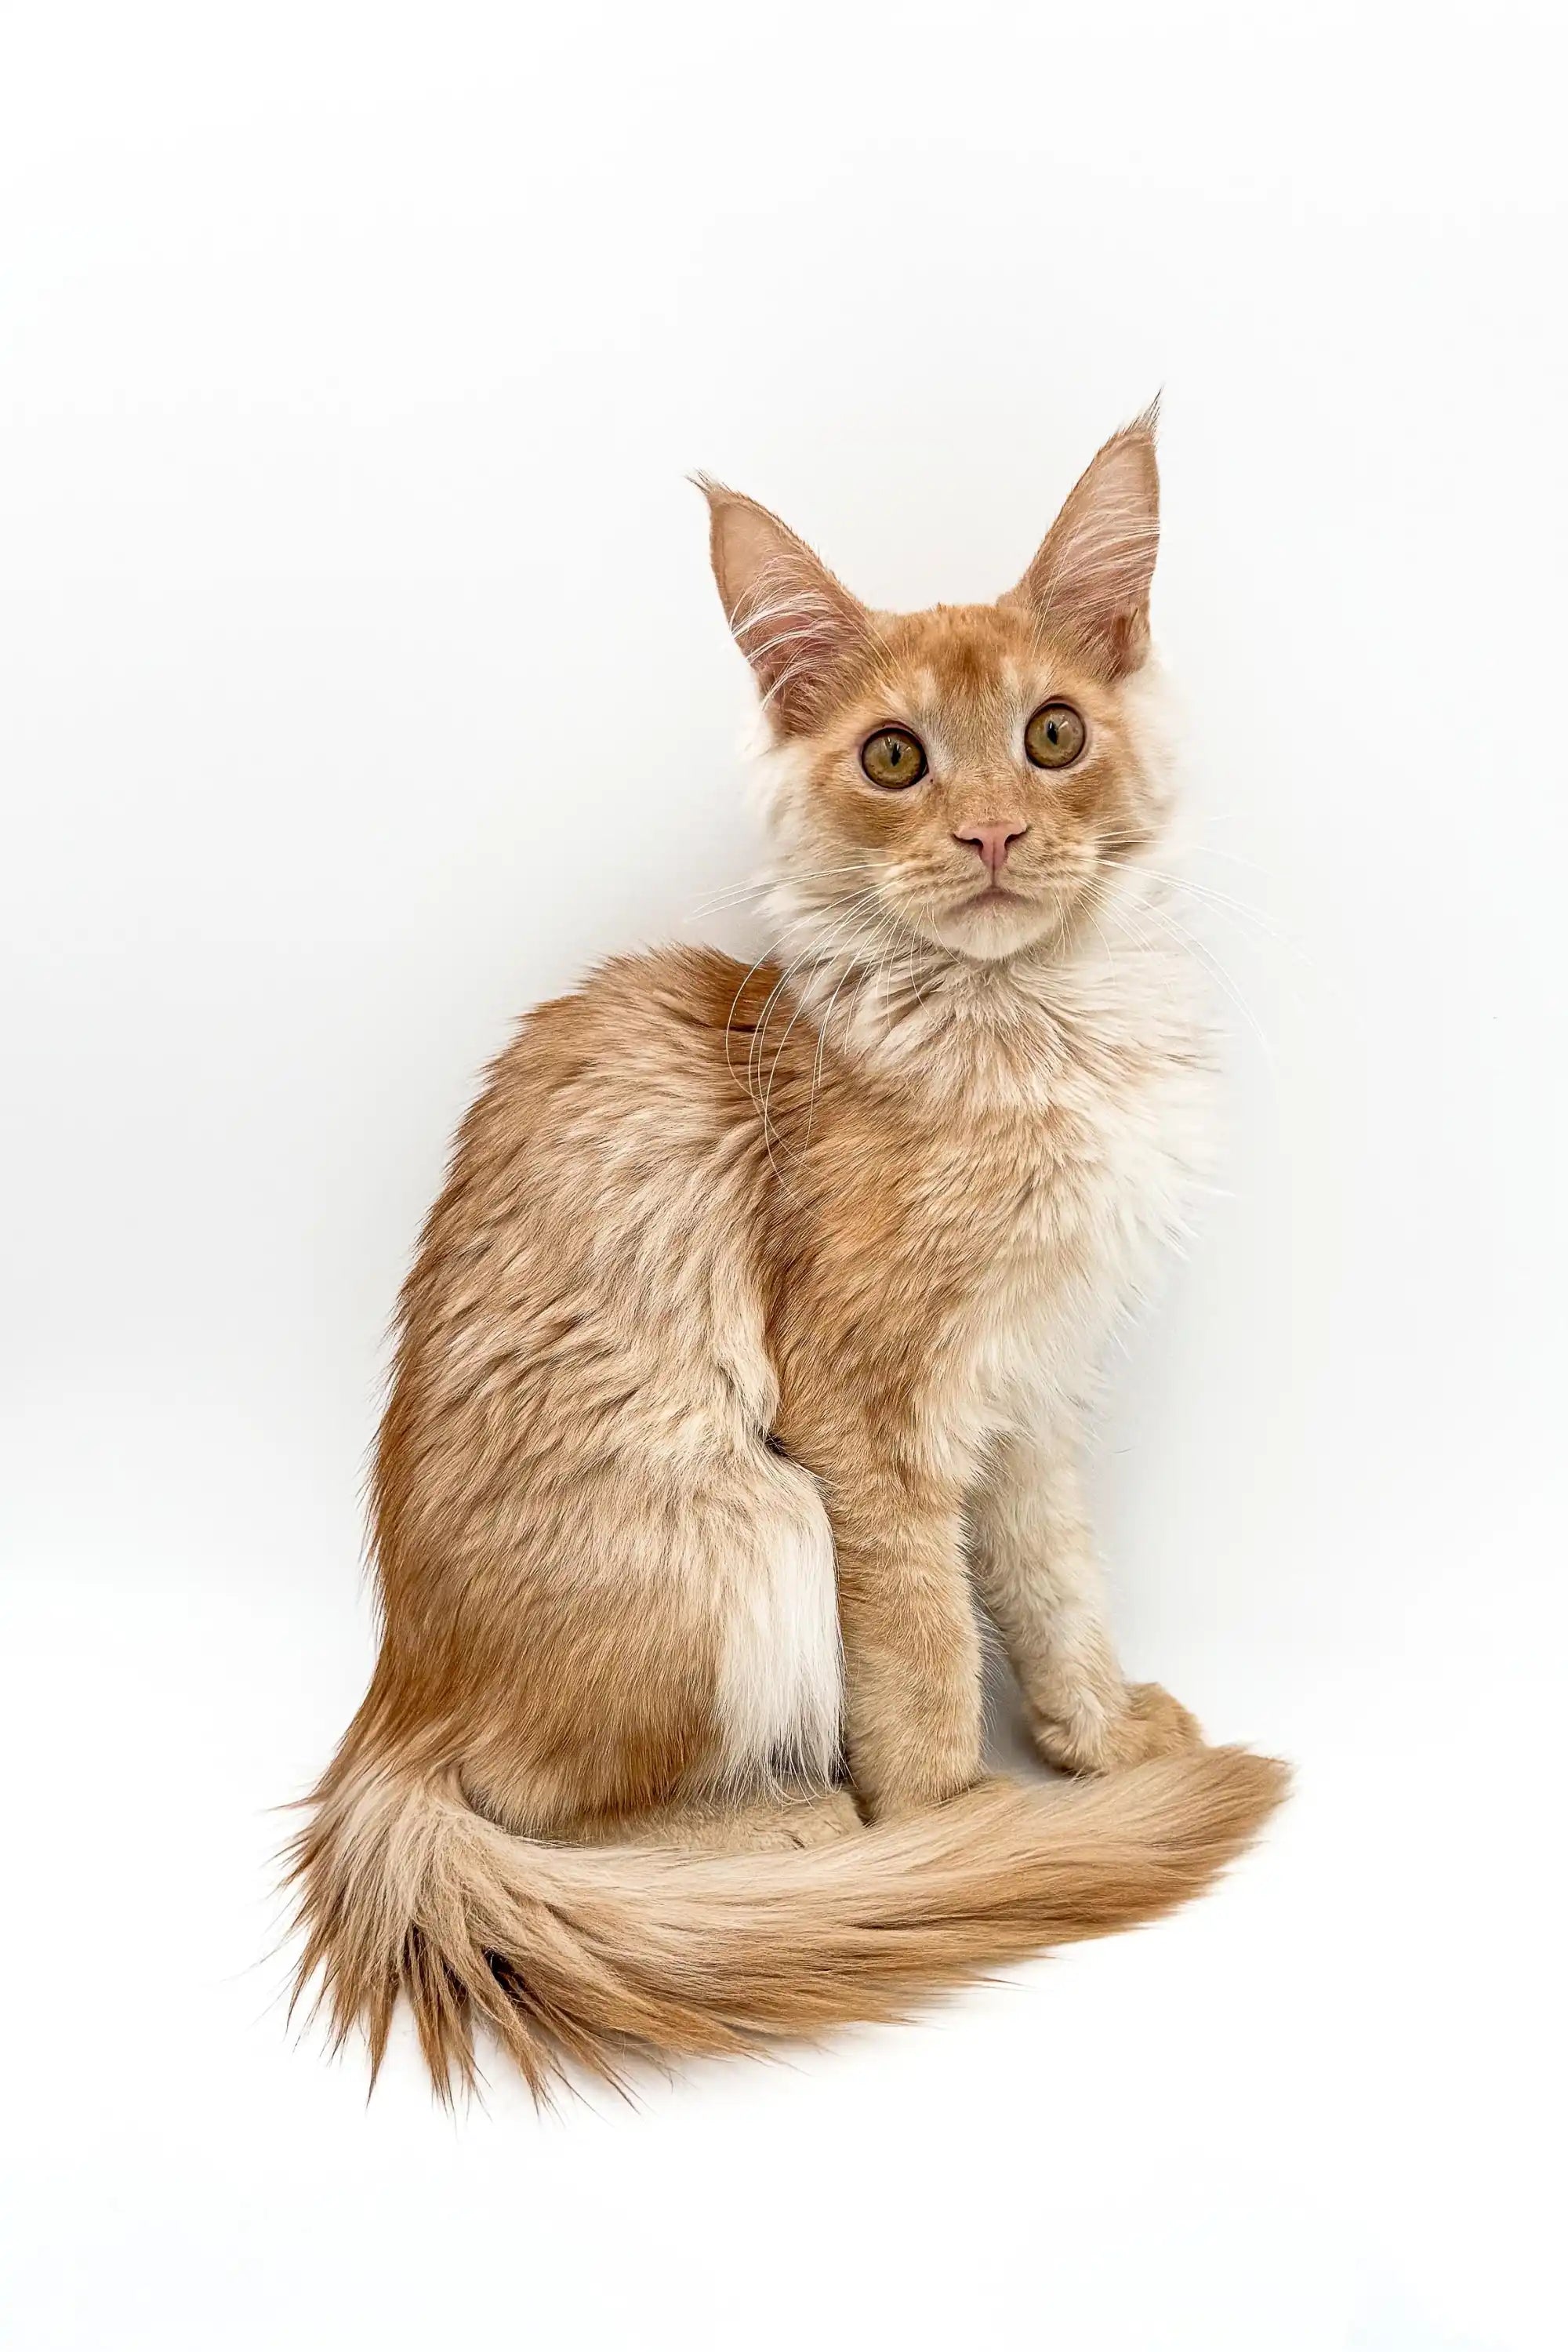 Maine Coon Kittens for Sale Prince | Kitten